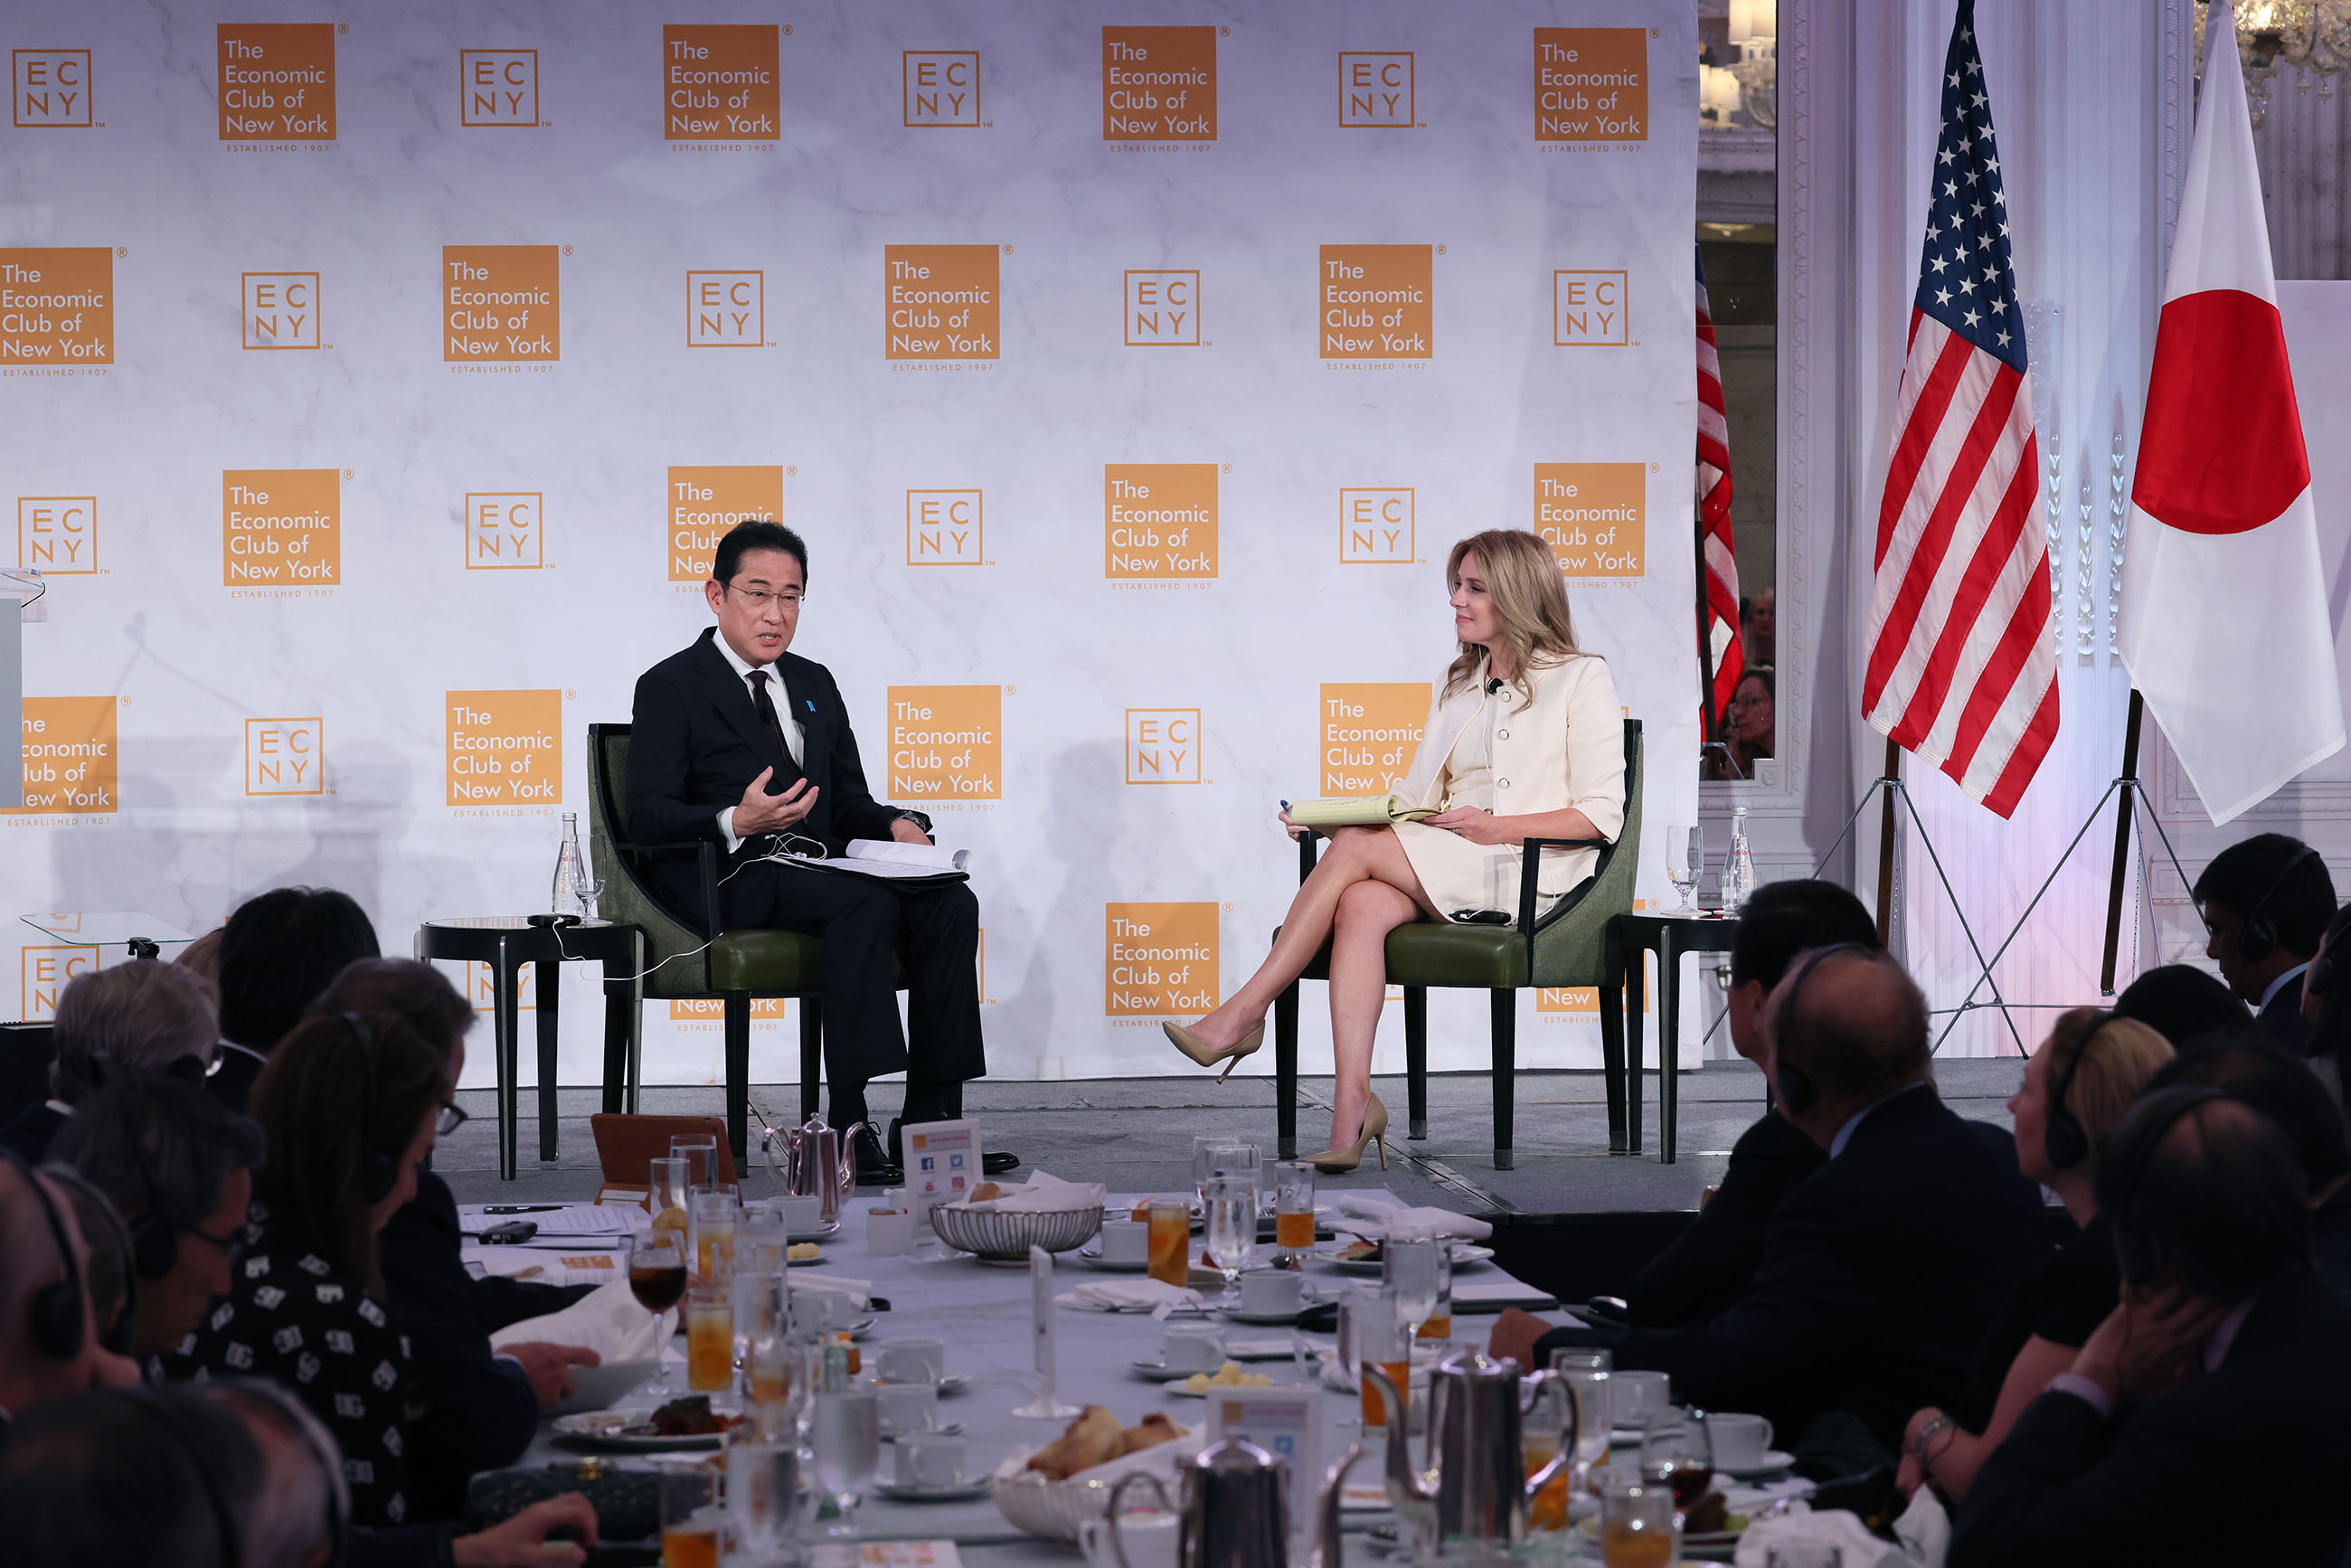 Prime Minister Kishida delivering his remarks to the Economic Club of New York (9)